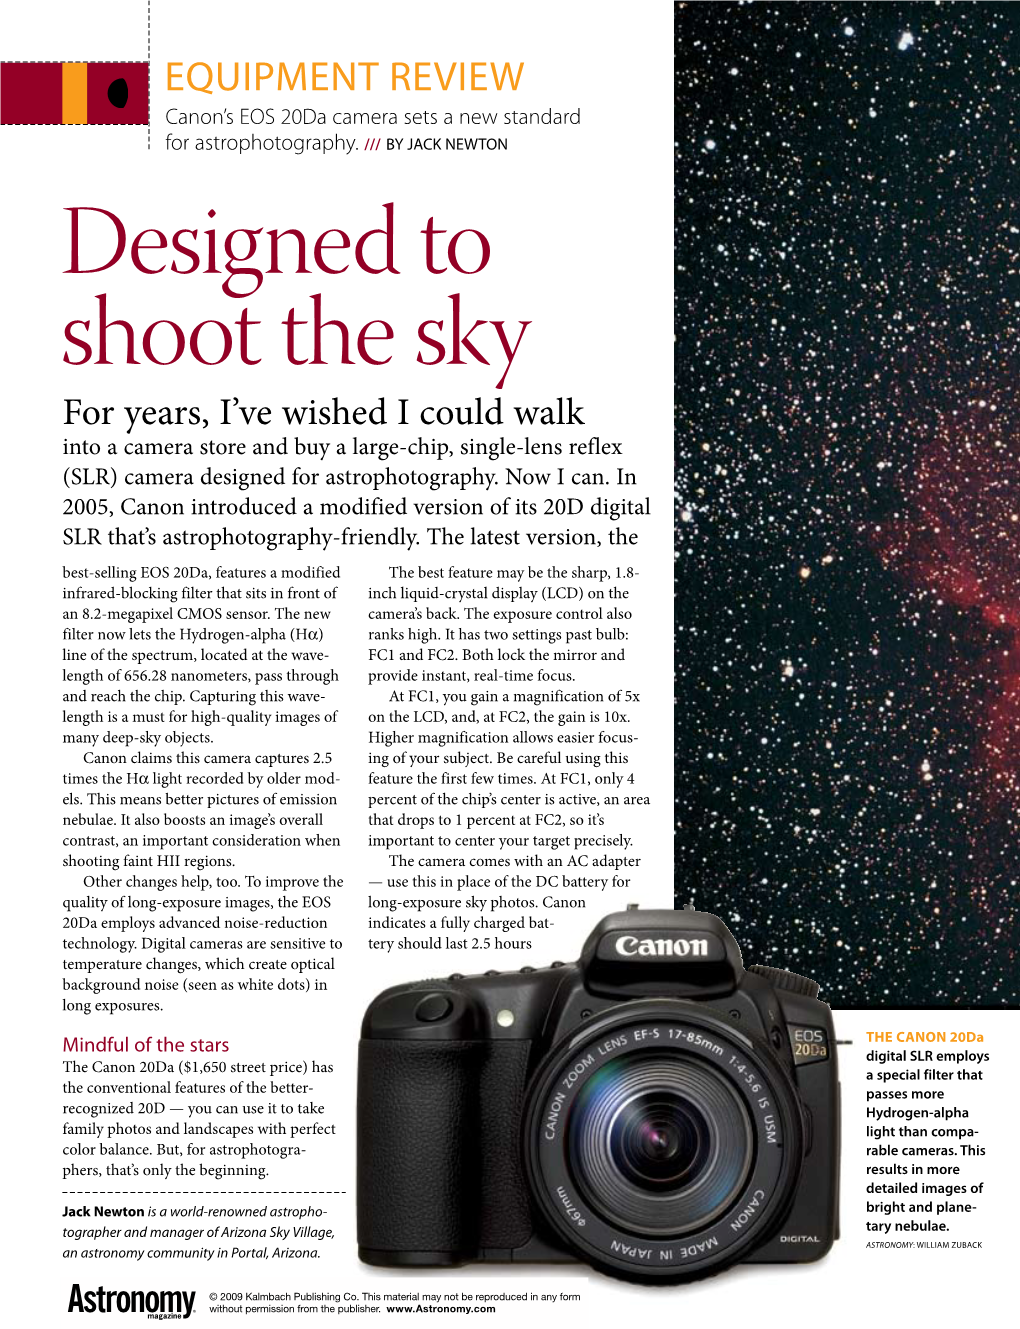 Designed to Shoot the Sky for Years, I’Ve Wished I Could Walk Into a Camera Store and Buy a Large-Chip, Single-Lens Reflex (SLR) Camera Designed for Astrophotography